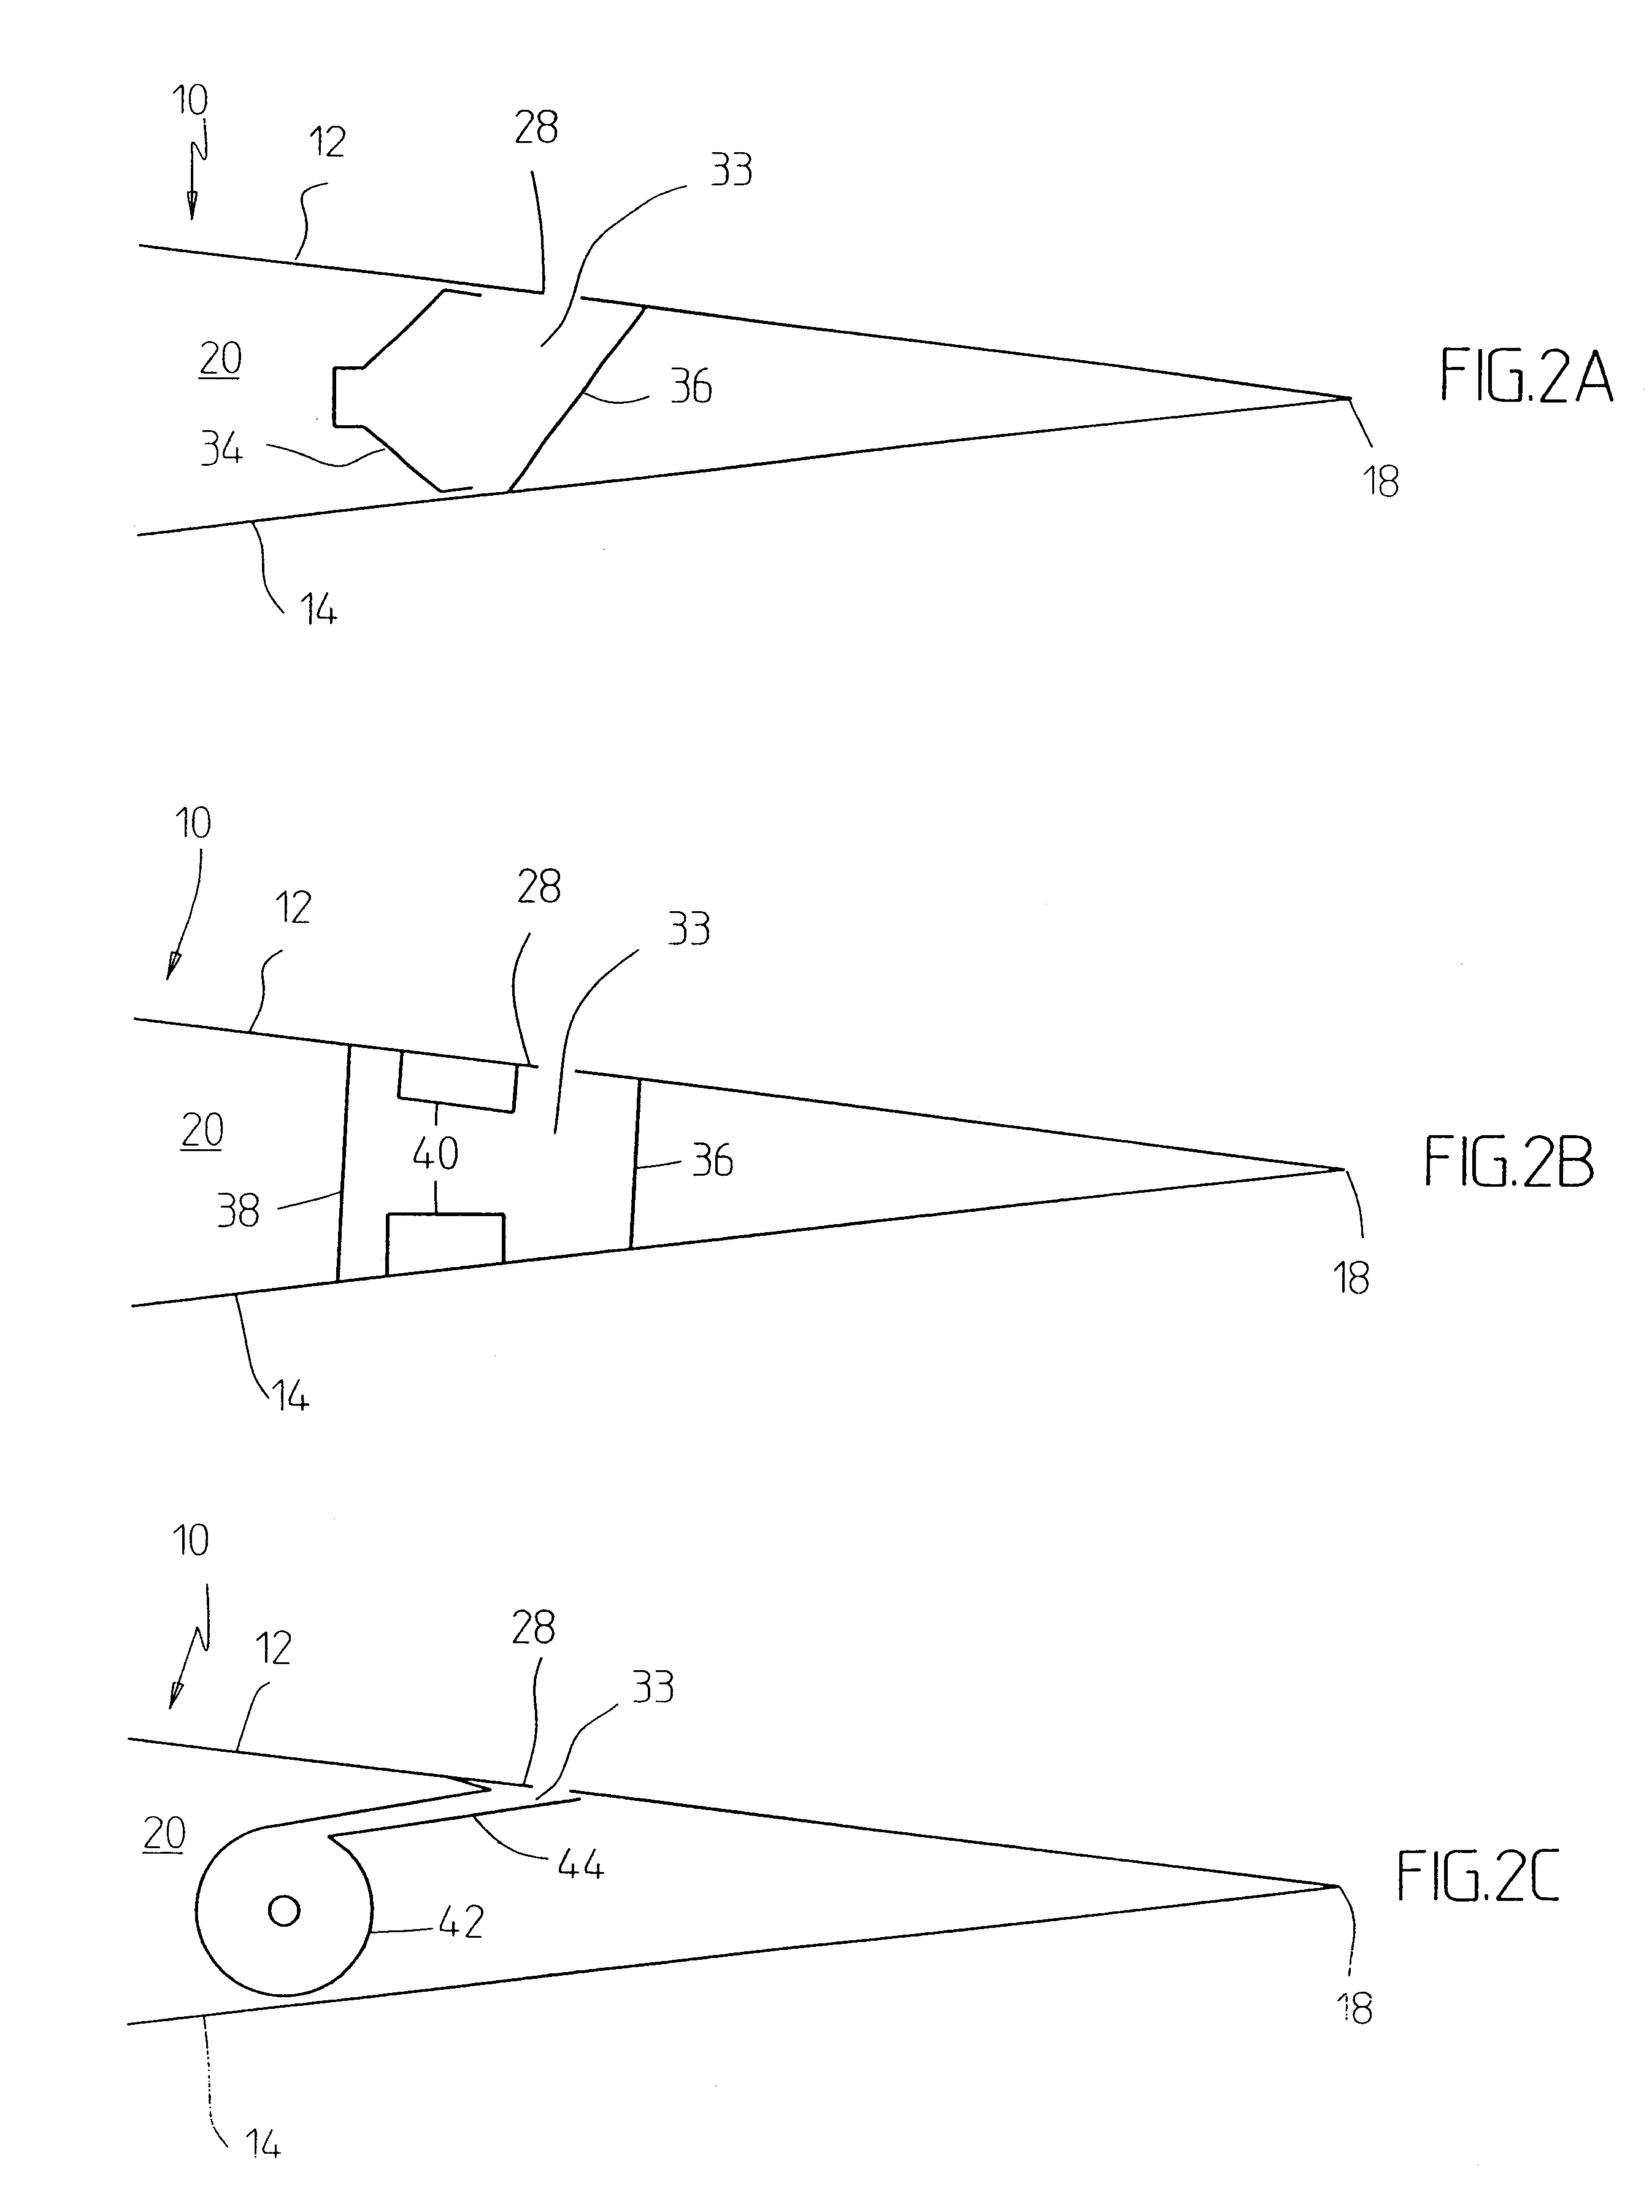 Airfoil with dynamic stall control by oscillatory forcing